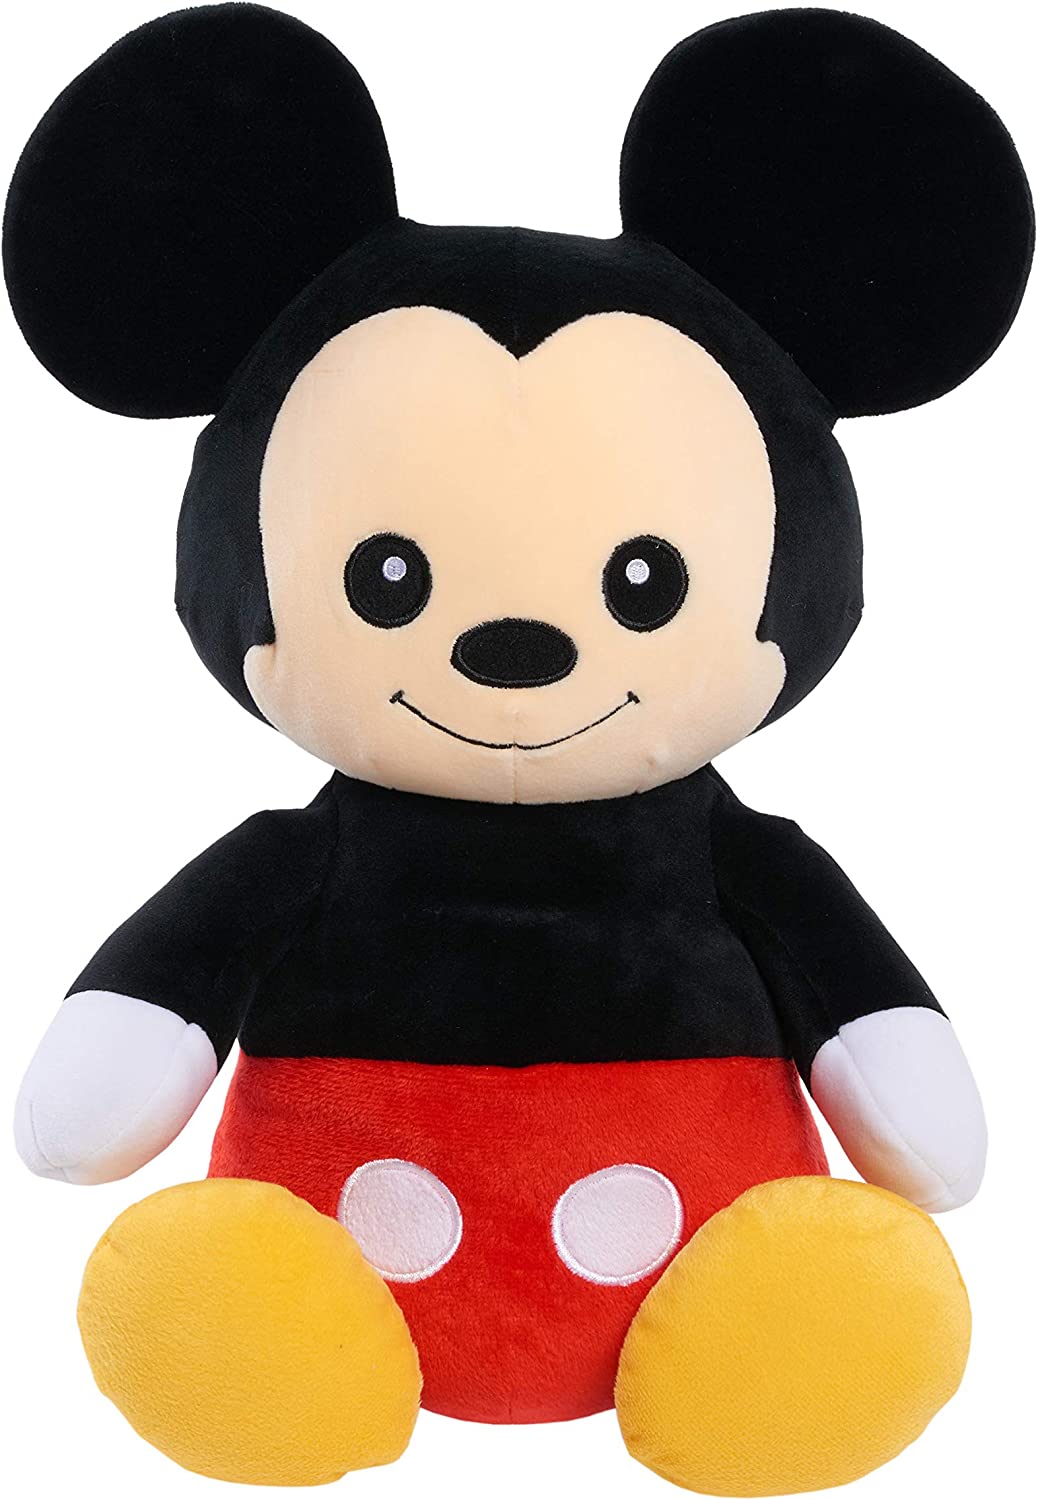 14" Disney Classics Mickey Mouse Comfort Weighted Plush Toy $7.70 + FS w/ Amazon Prime or FS on $25+